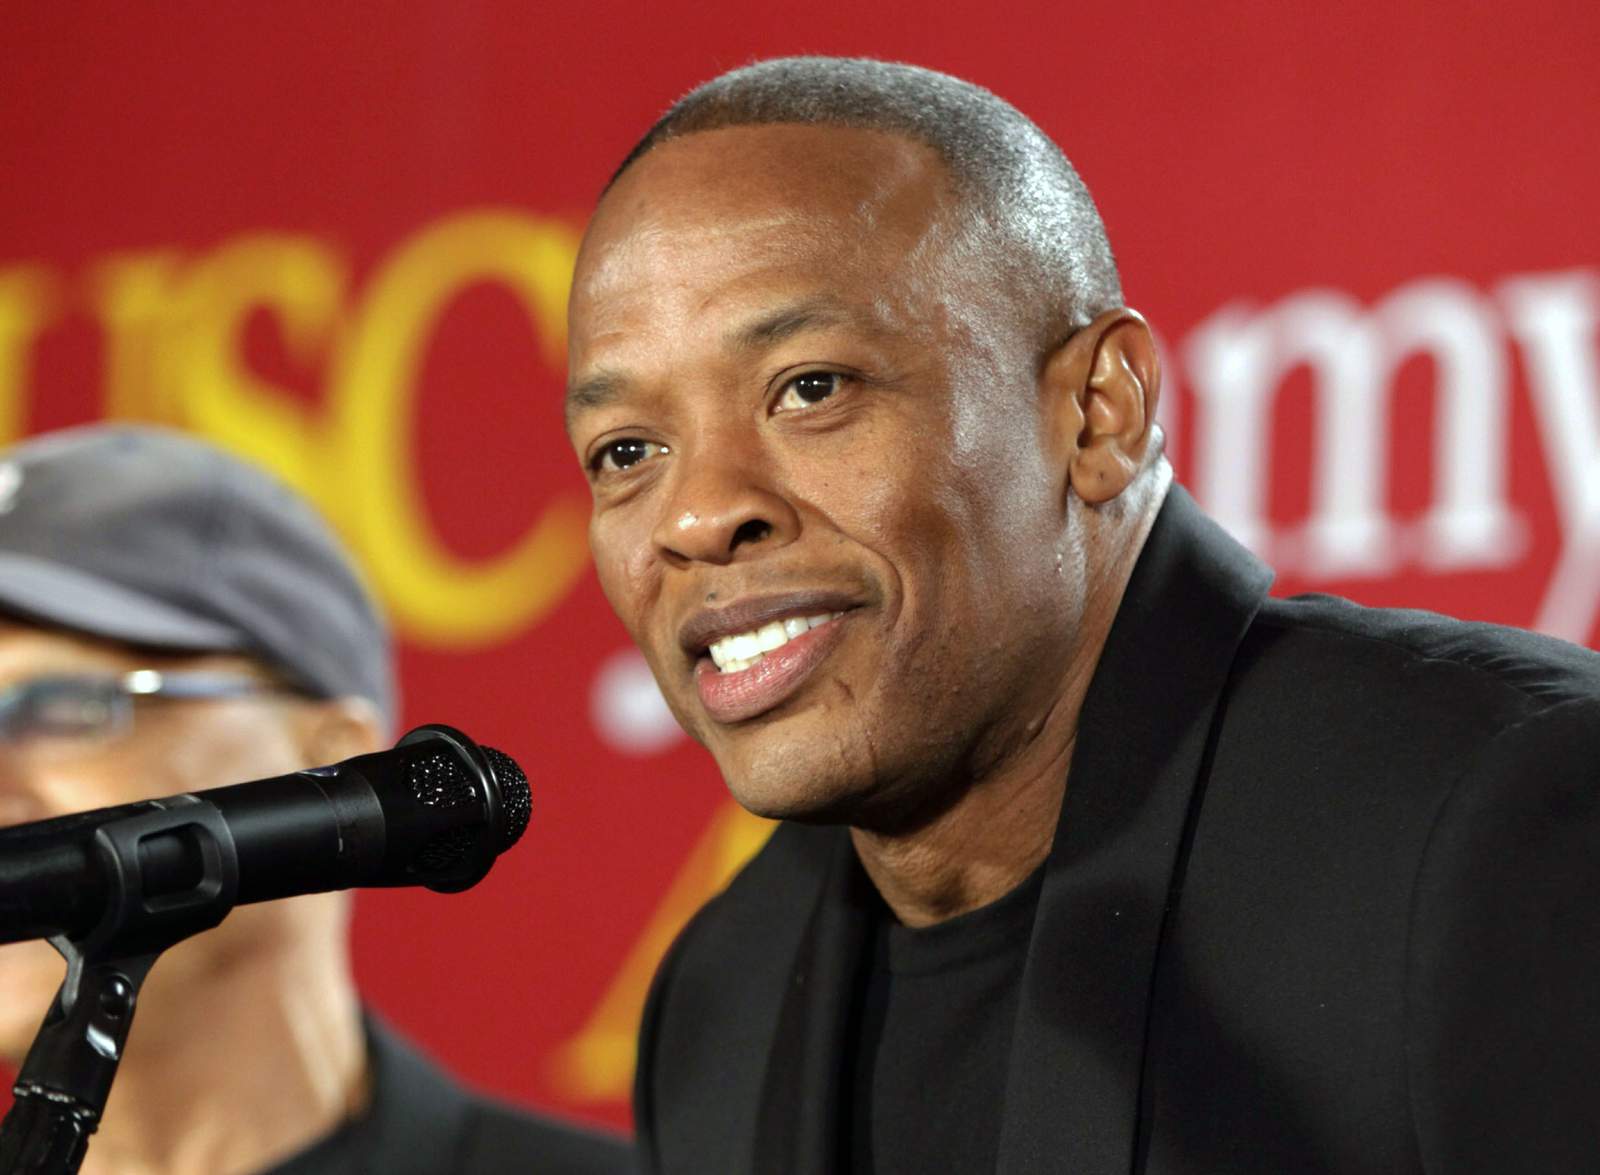 Dr. Dre back home after reported brain aneurysm treatment